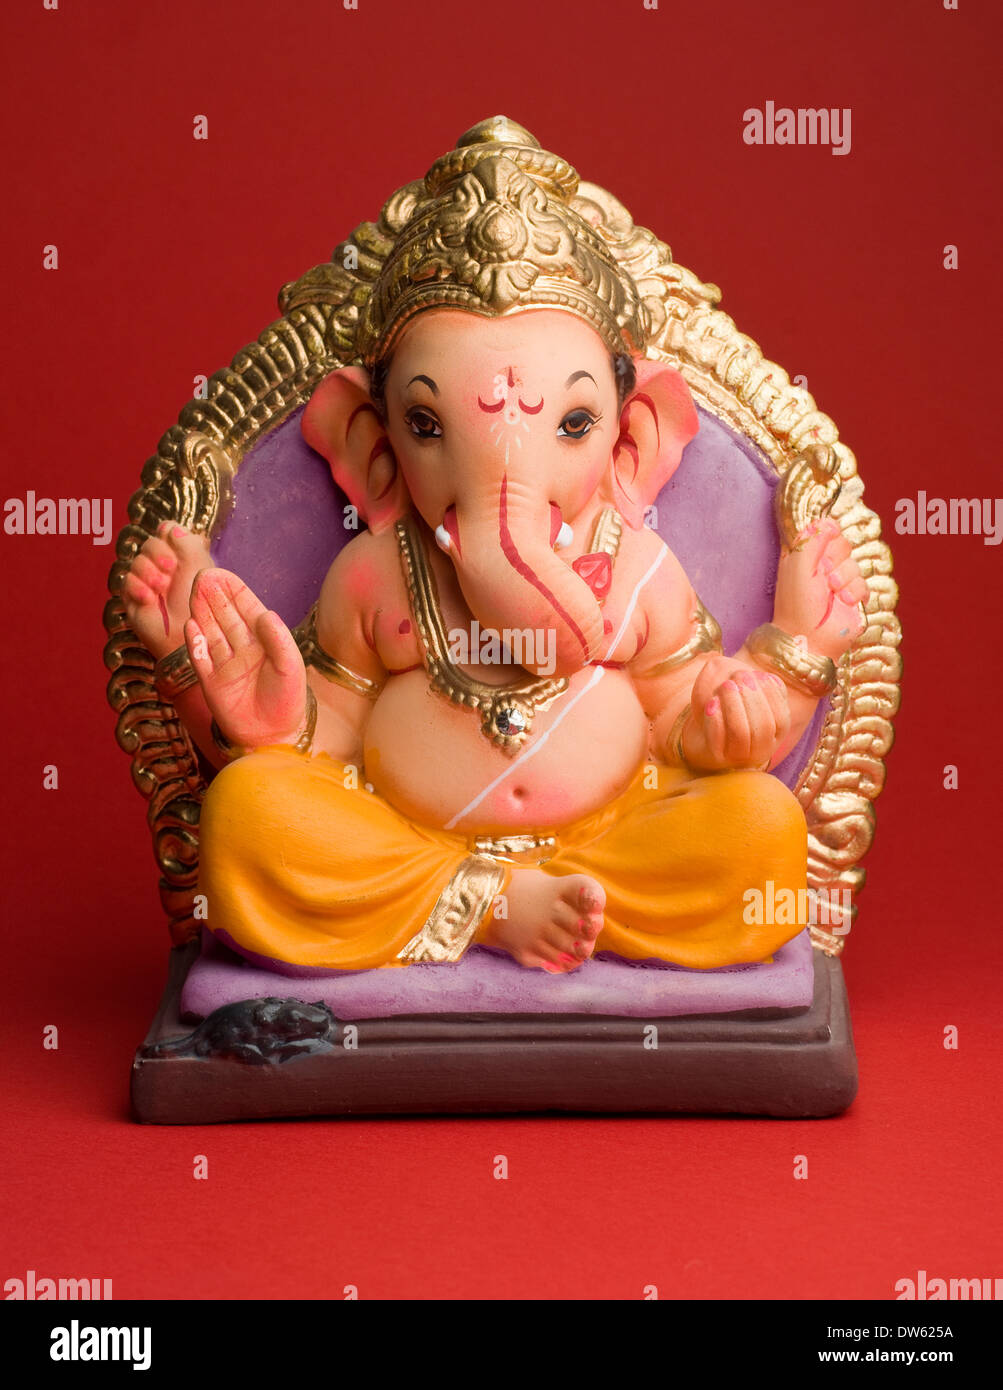 A clay statue of an Indian god Lord Ganesha. Stock Photo